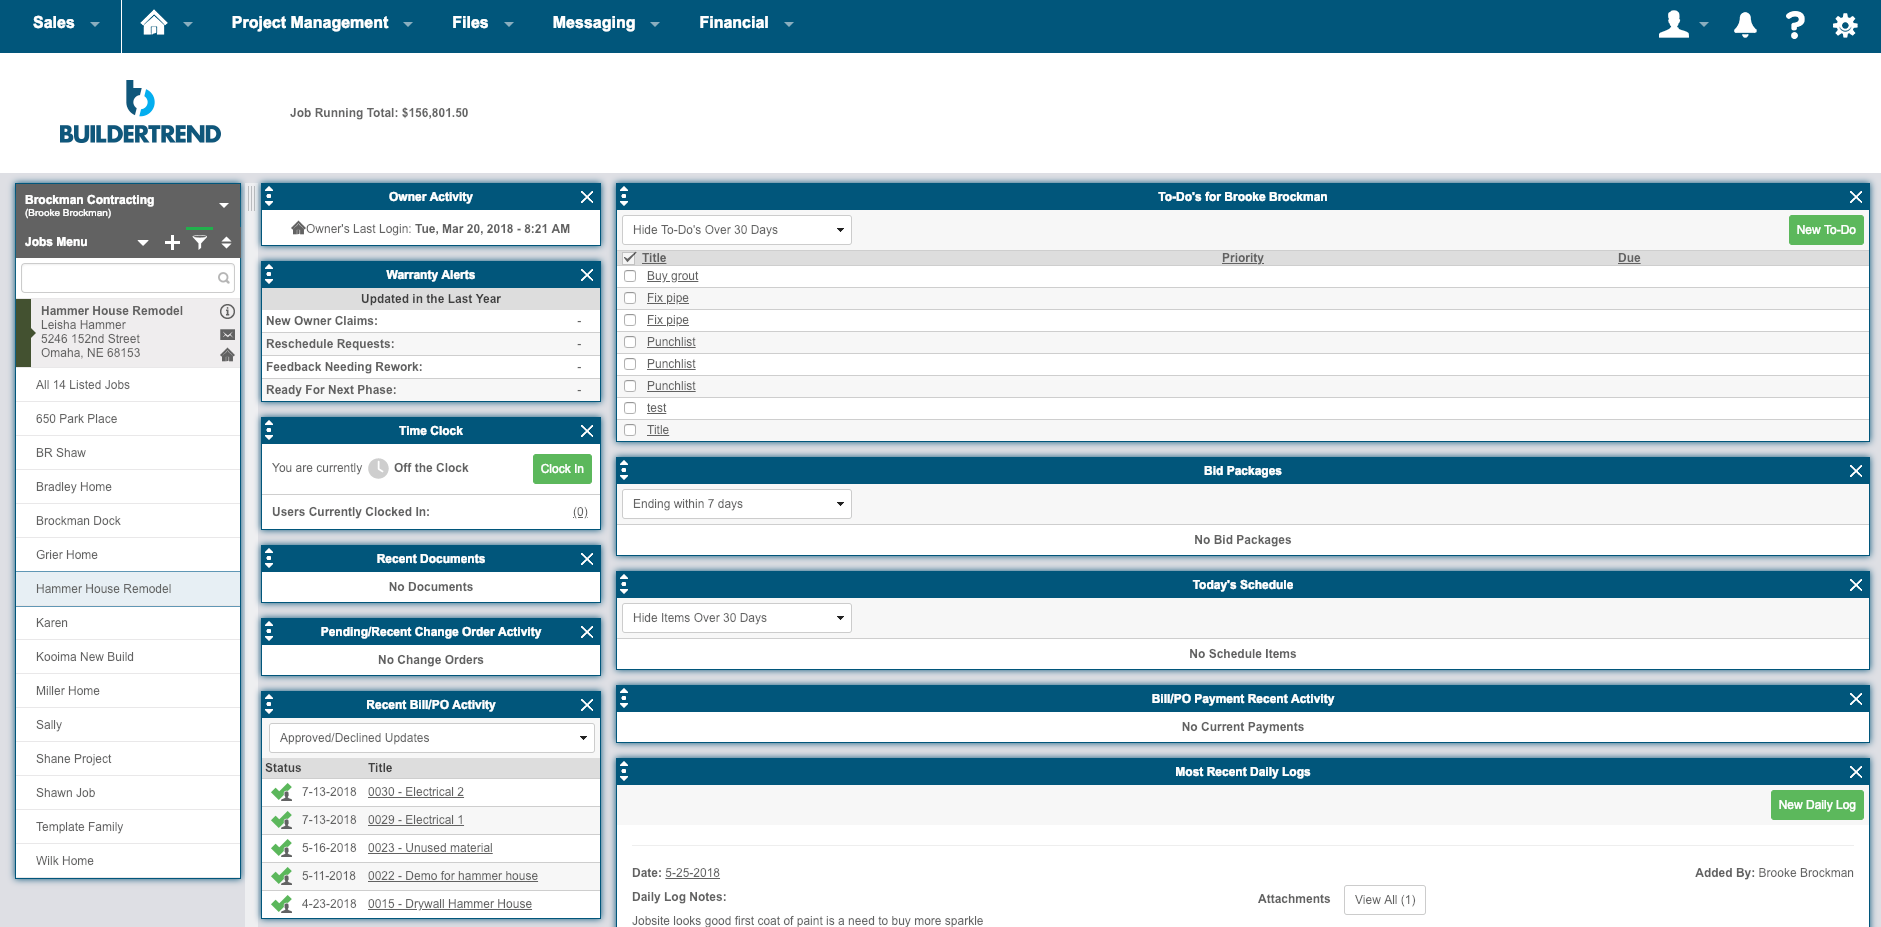 View on project data details in Buildertrend construction project management software